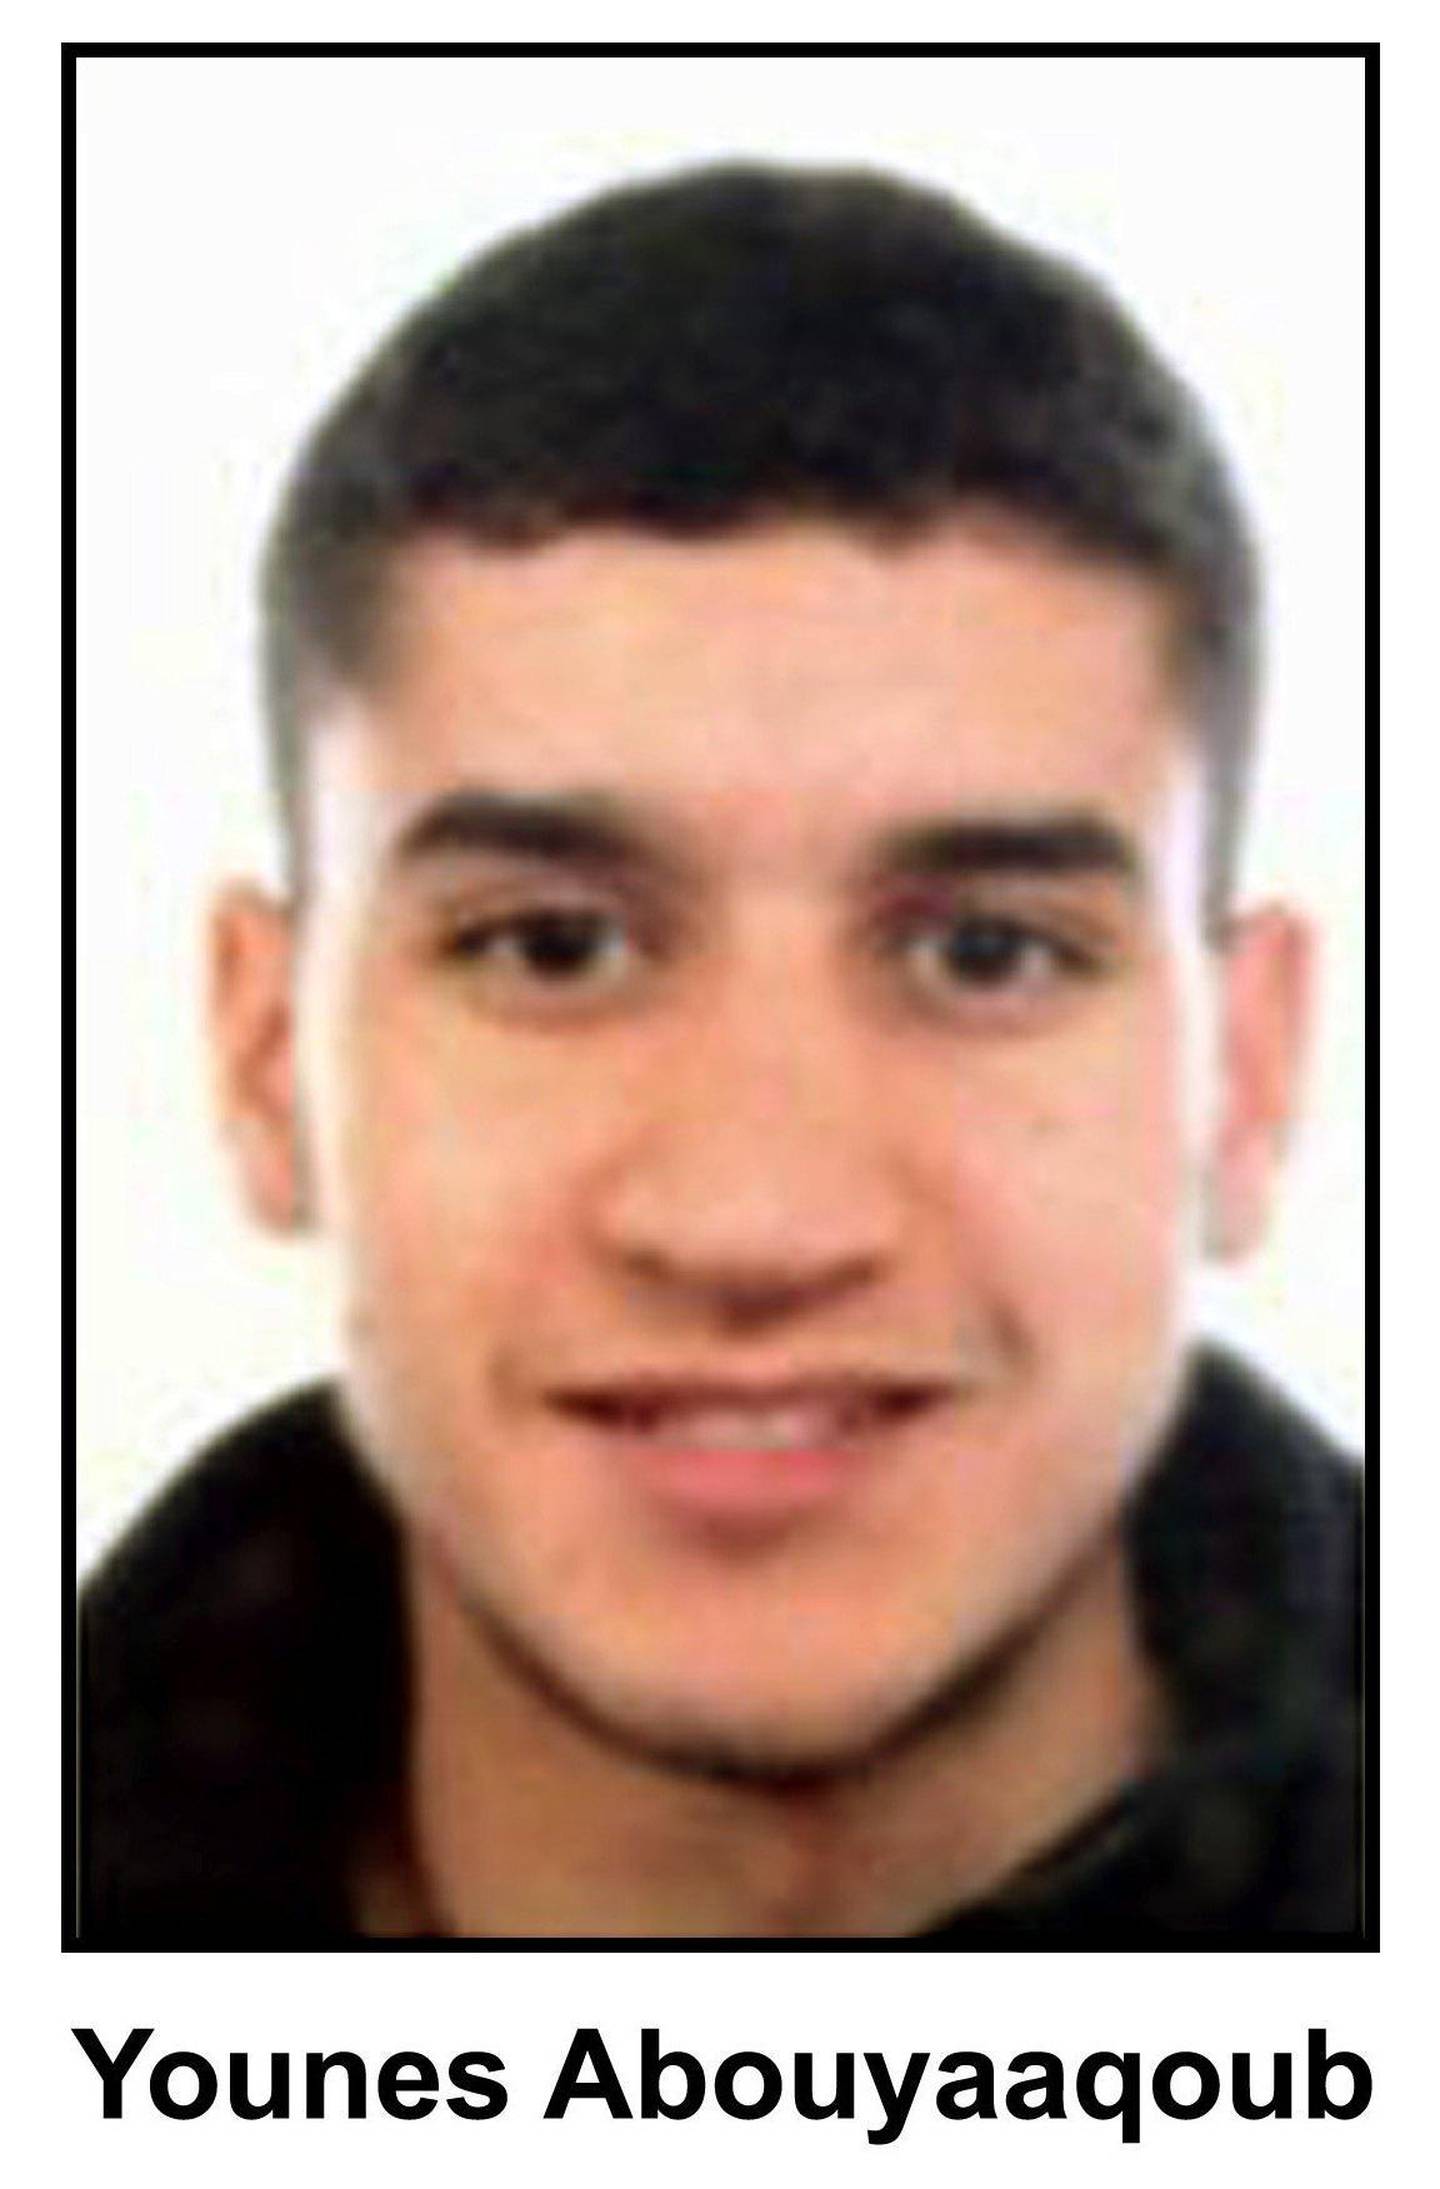 Younes Abouyaaqoub is believed to be the driver of the van in the Las Ramblas attack. Credit: EPA